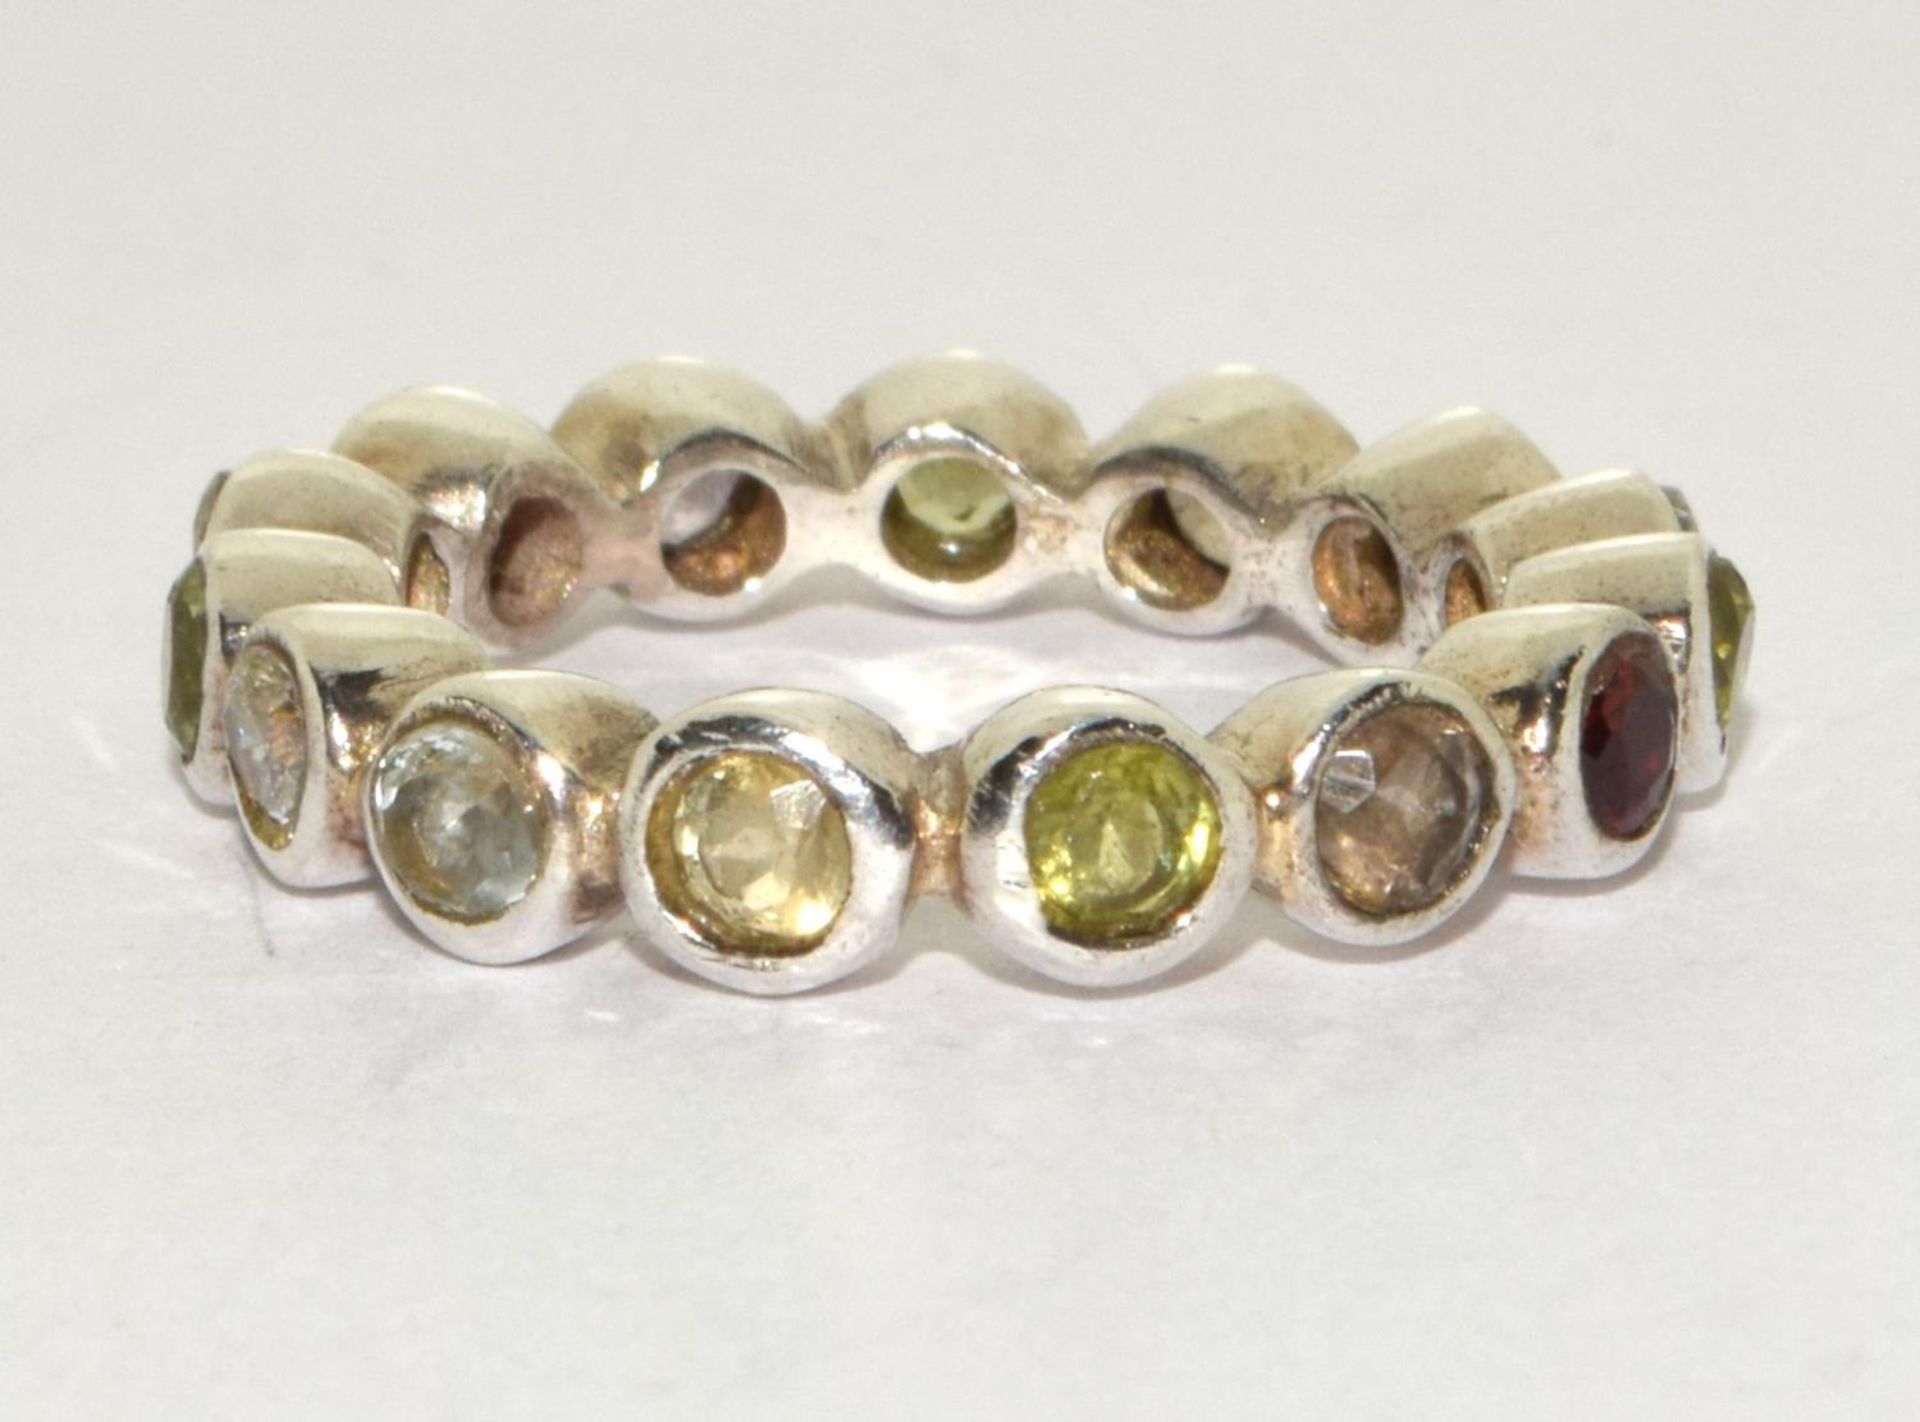 Multi natural gemstone 925 silver full band eternity ring size N - Image 3 of 3